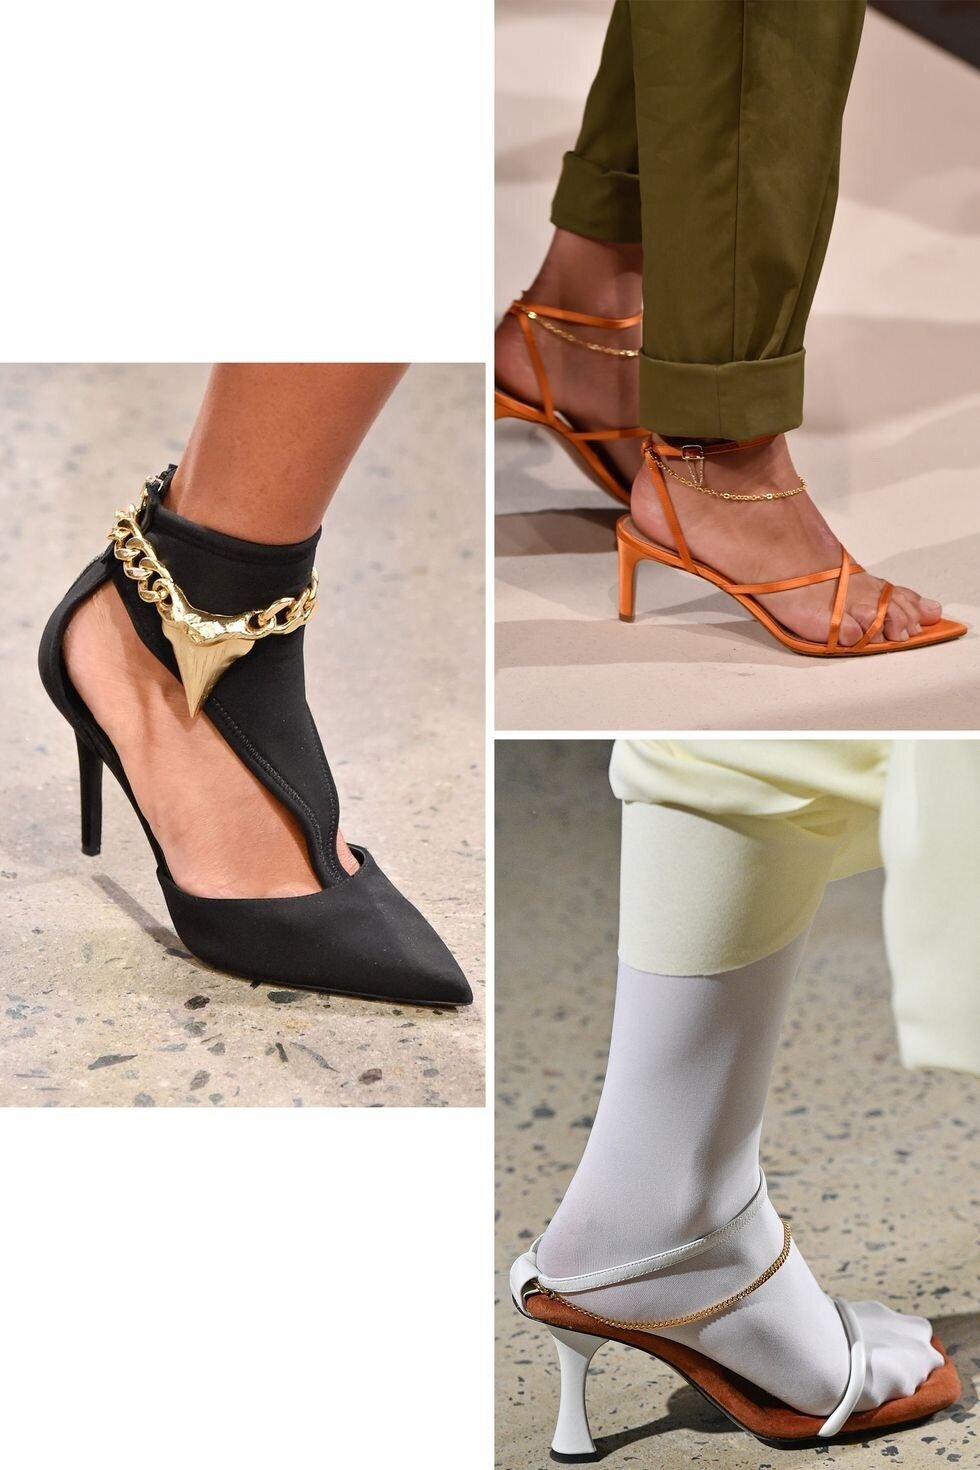 7 Shoe Trends That Will Rule 2020